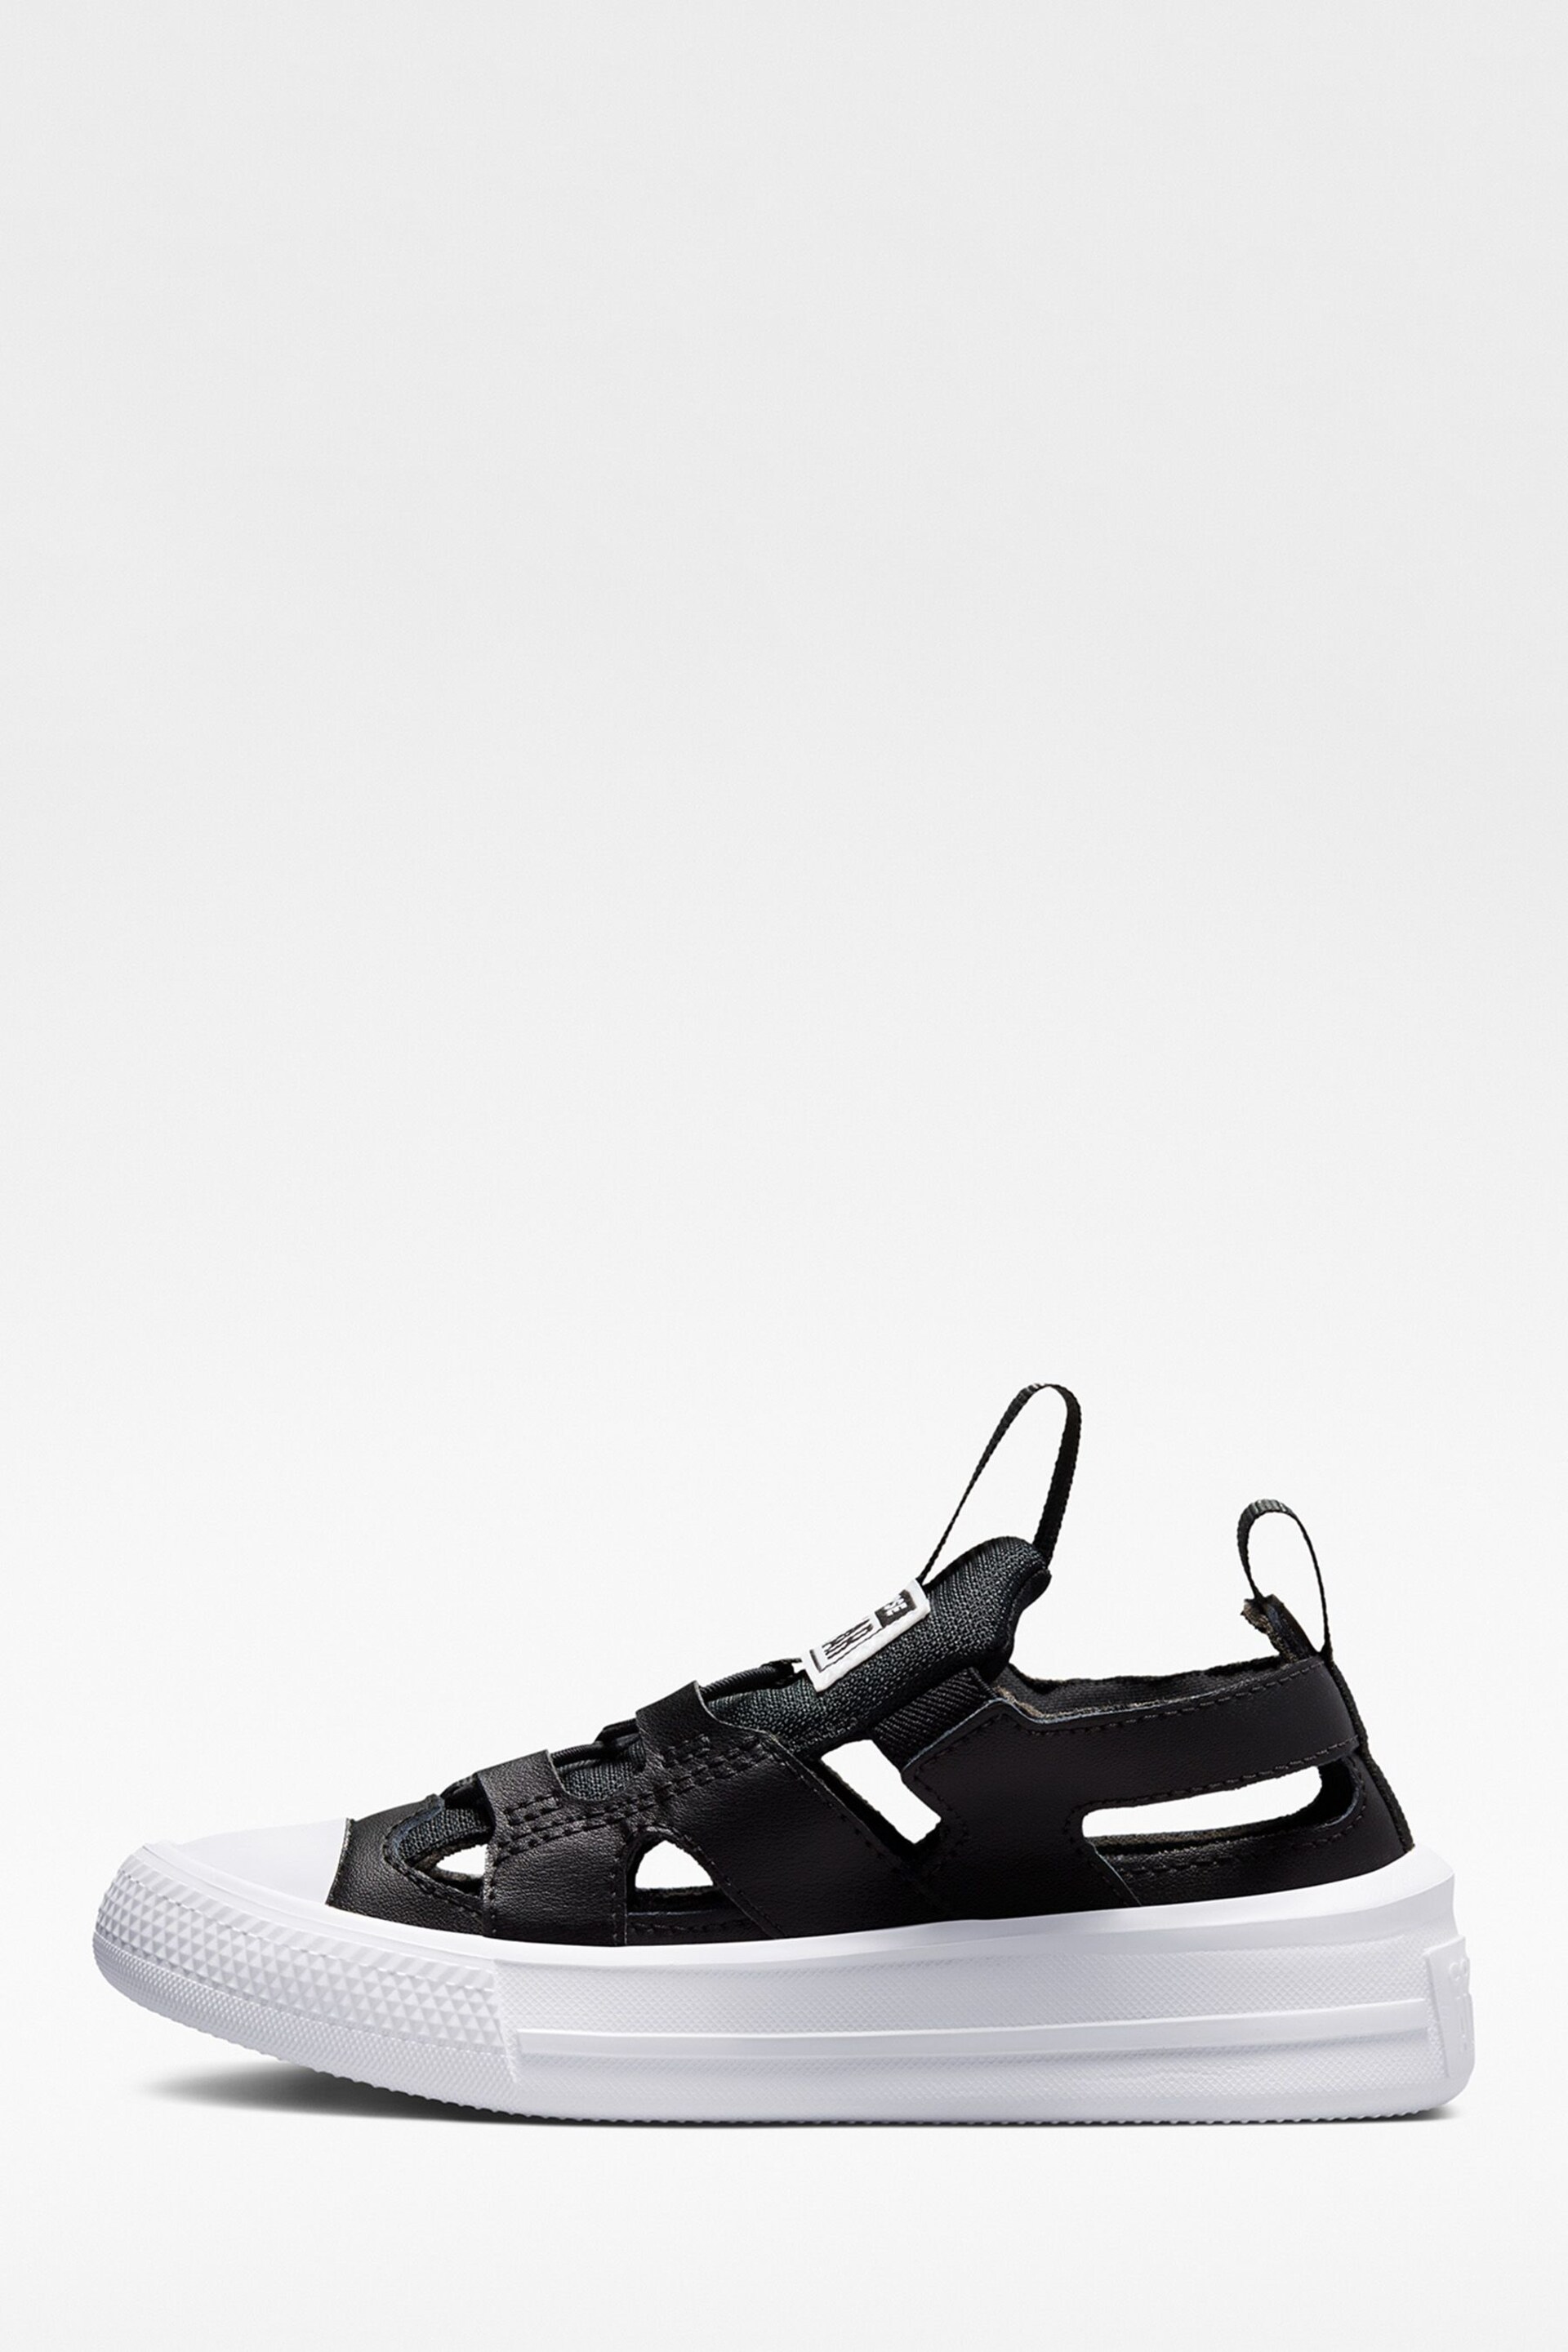 Converse Black/White All Star Ultra Junior Sandals - Image 2 of 6